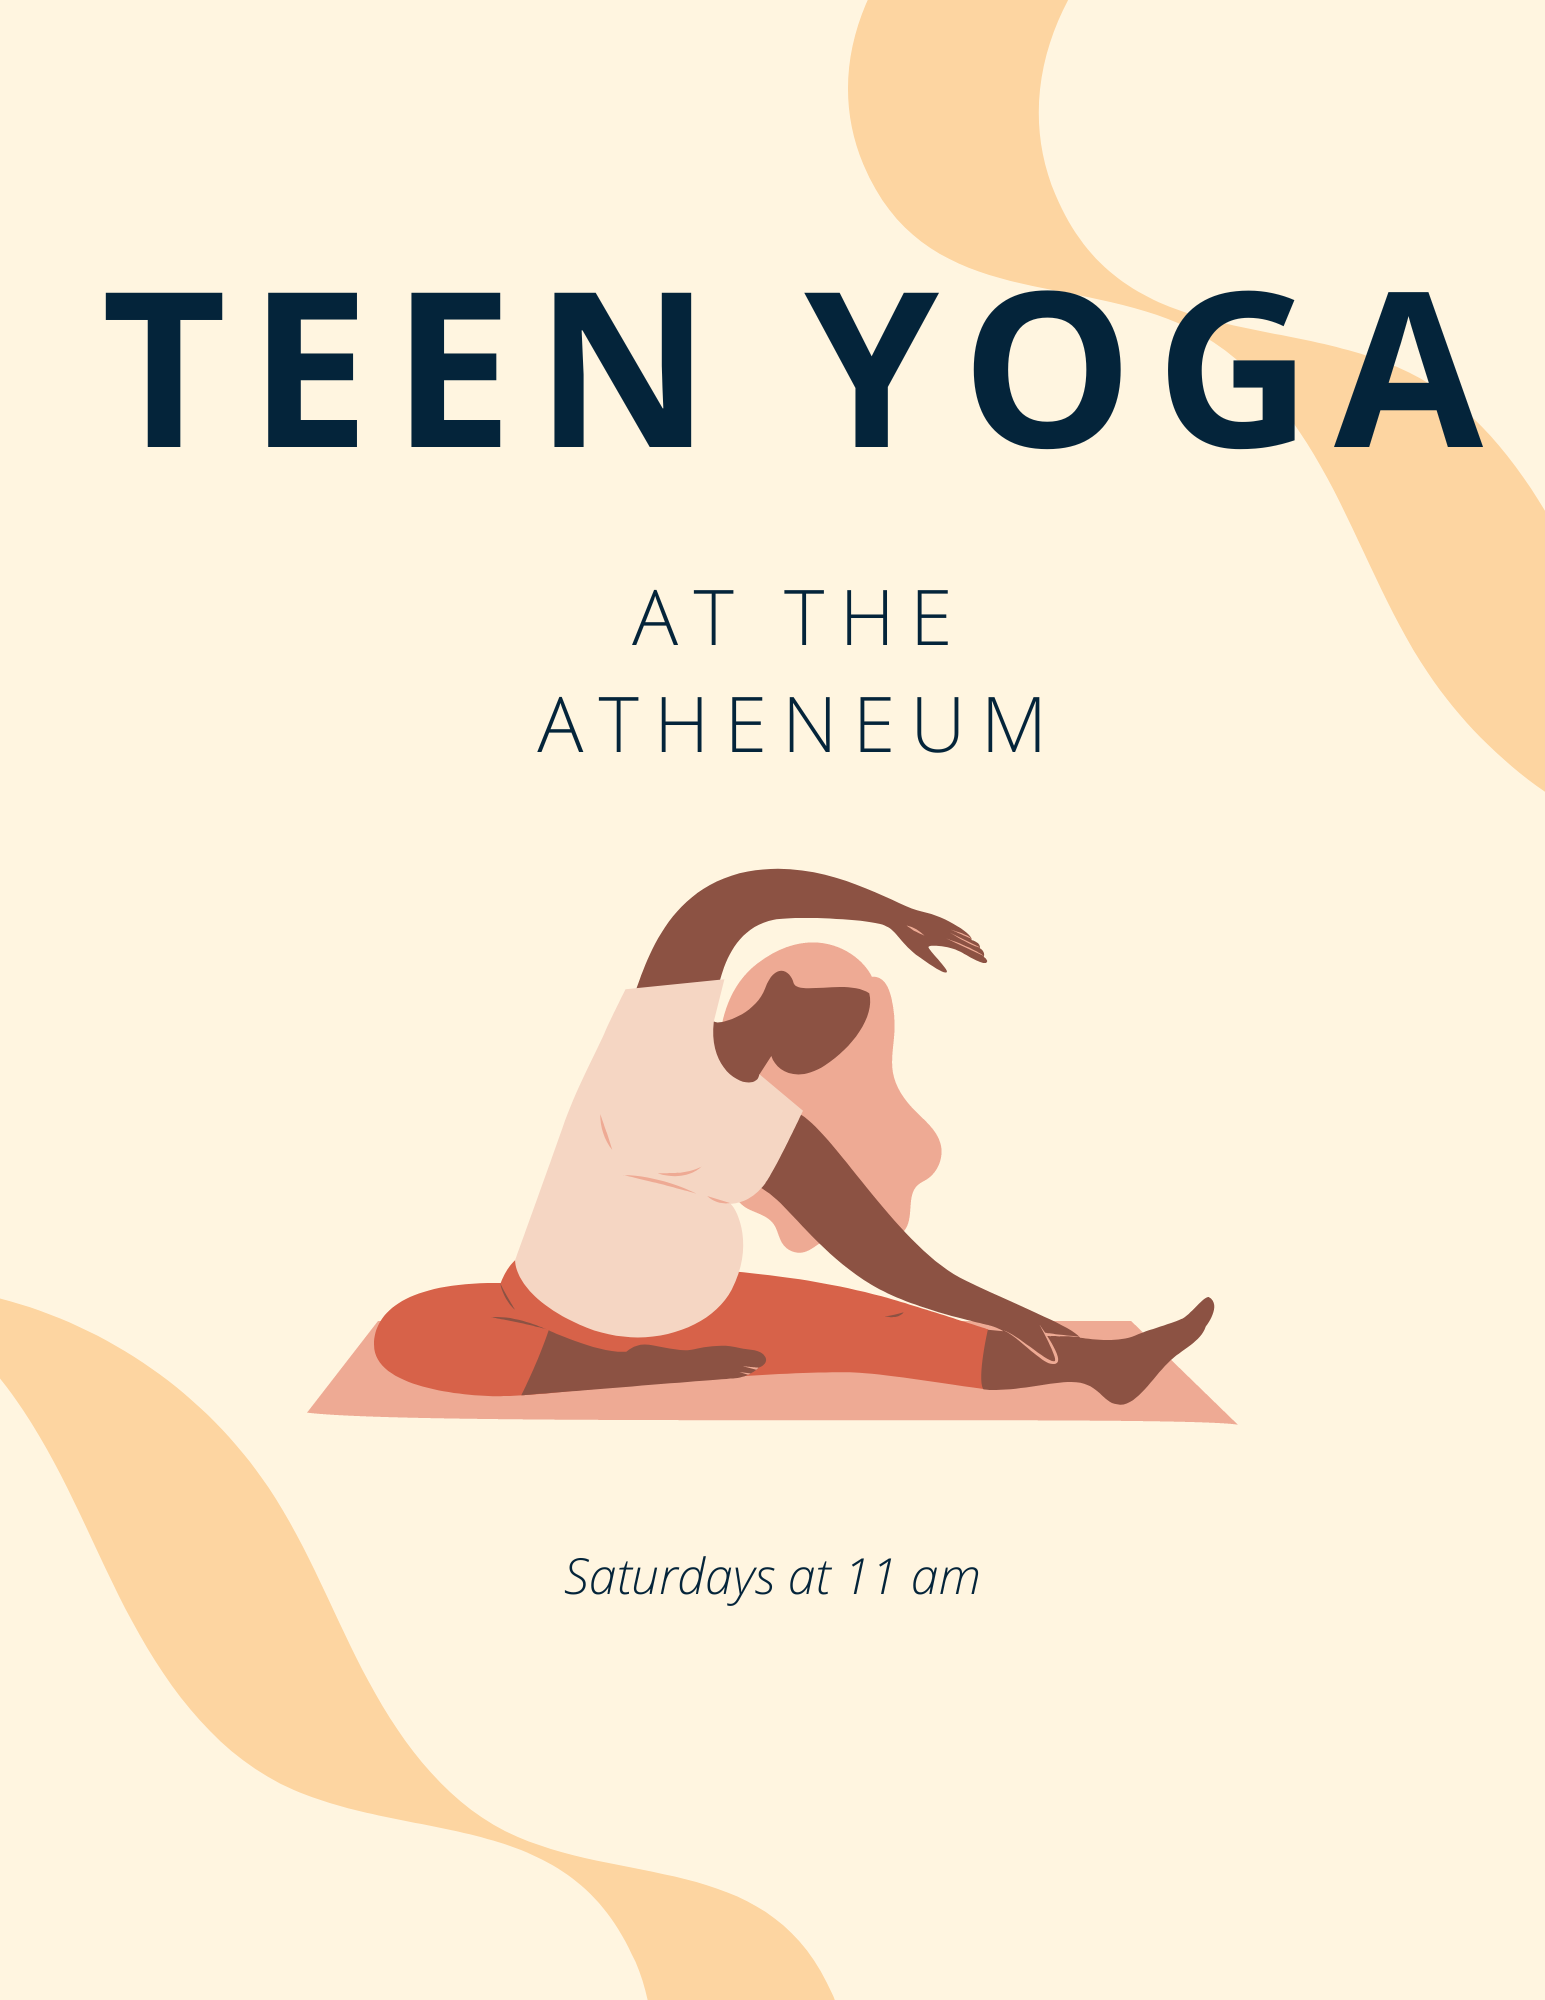 A person doing a side stretch on a yellow background. The words "teen yoga at the atheneum" in bold, followed by "saturdays at 11 am"